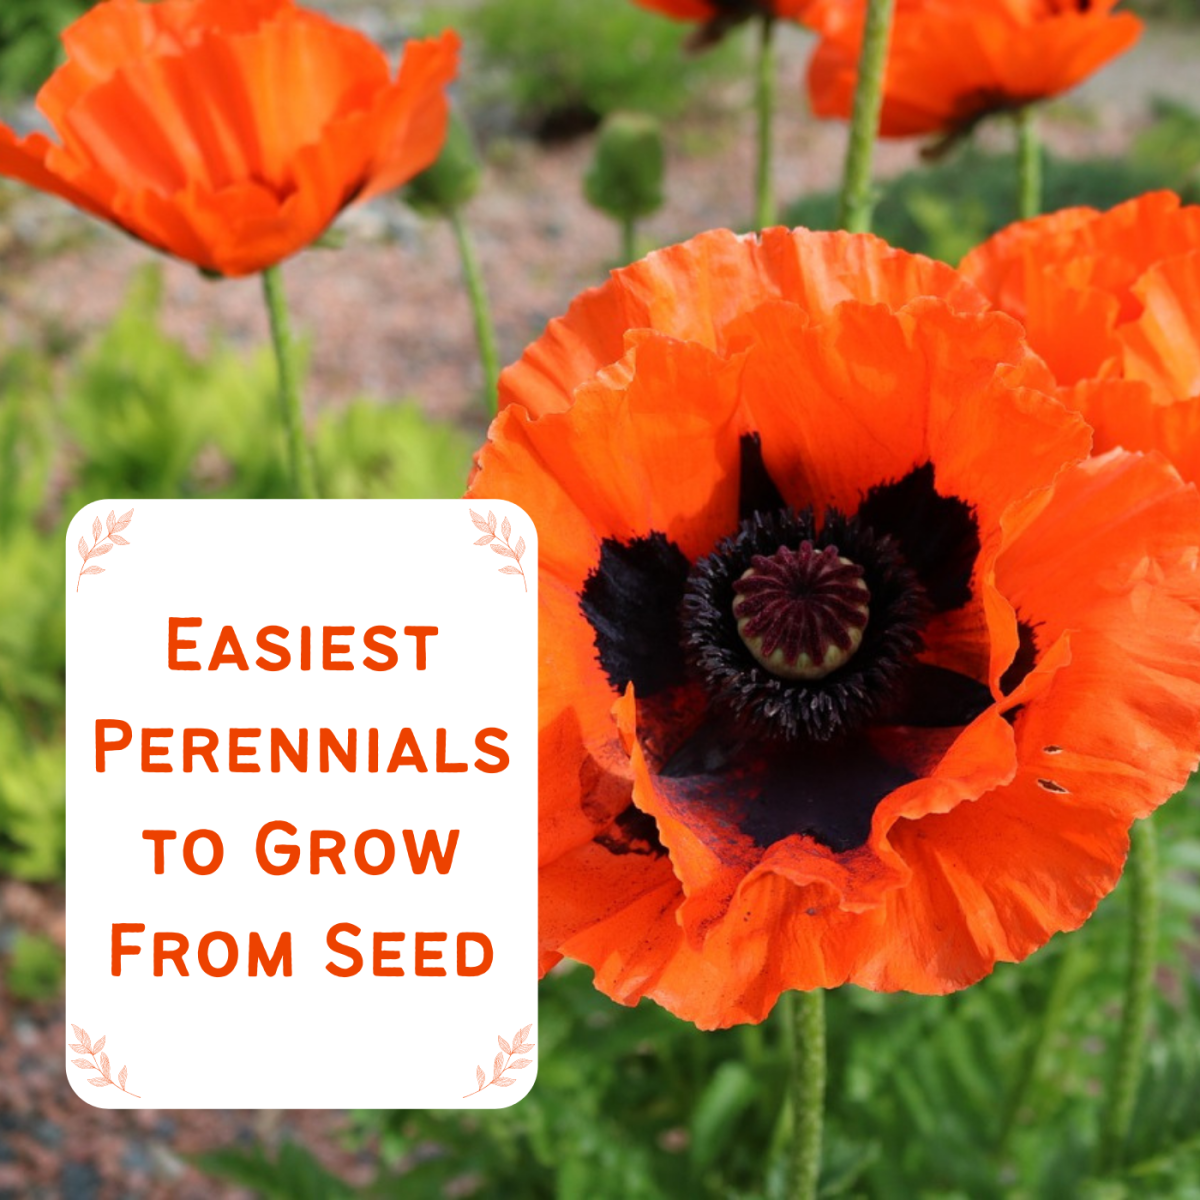 Top 20 Easy Perennial Plants to Grow From Seed   Dengarden